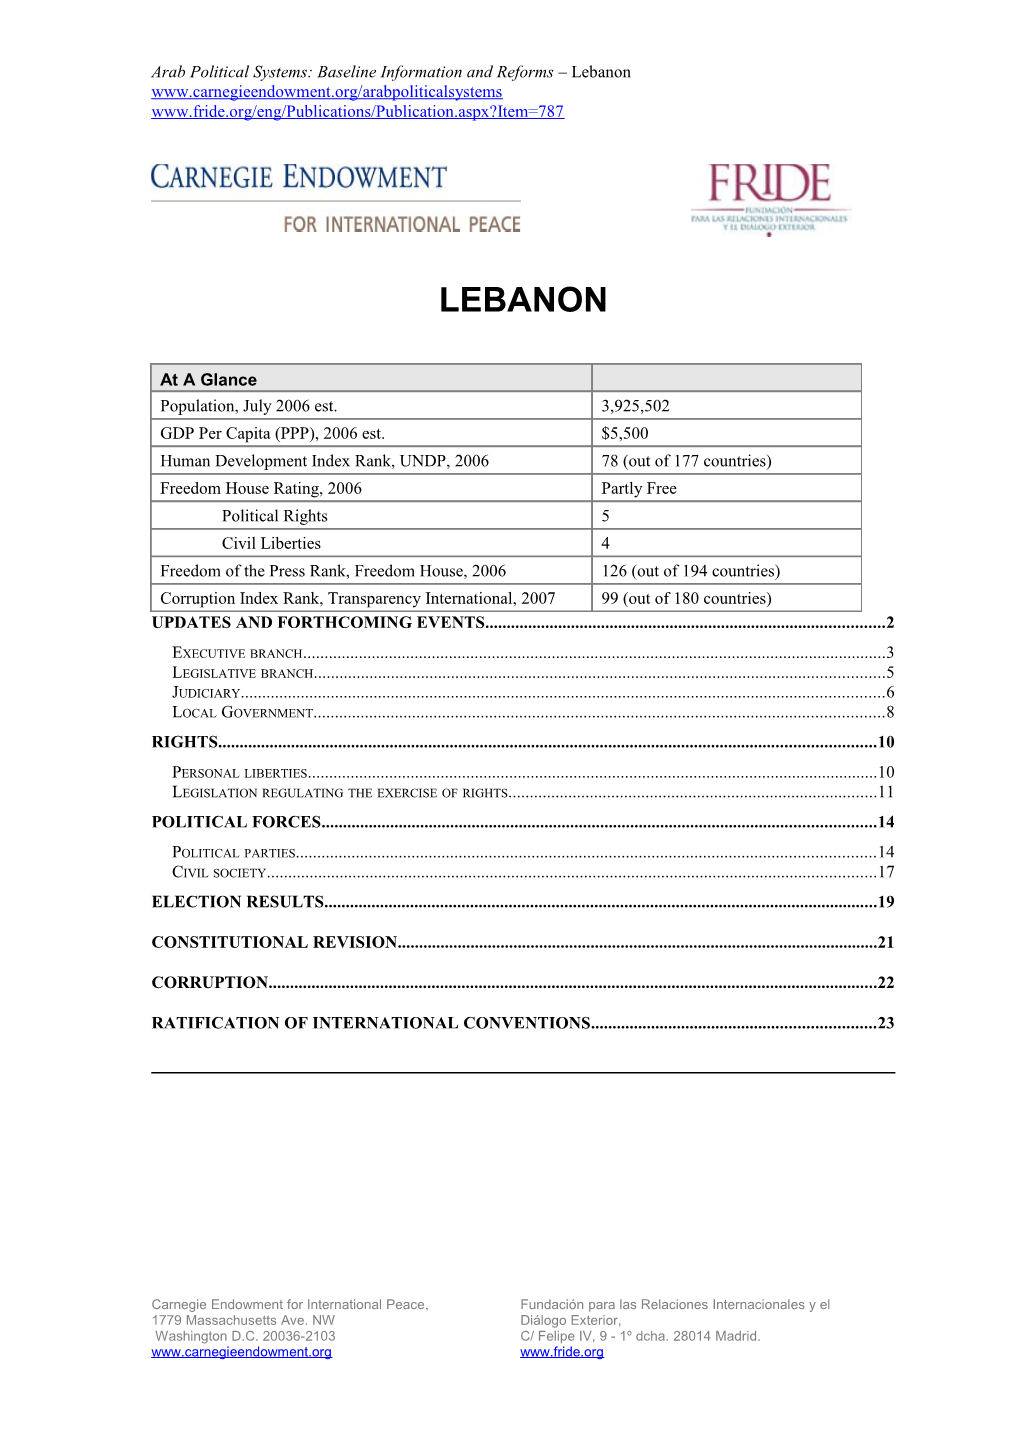 Arab Political Systems: Baseline Information and Reforms Lebanon